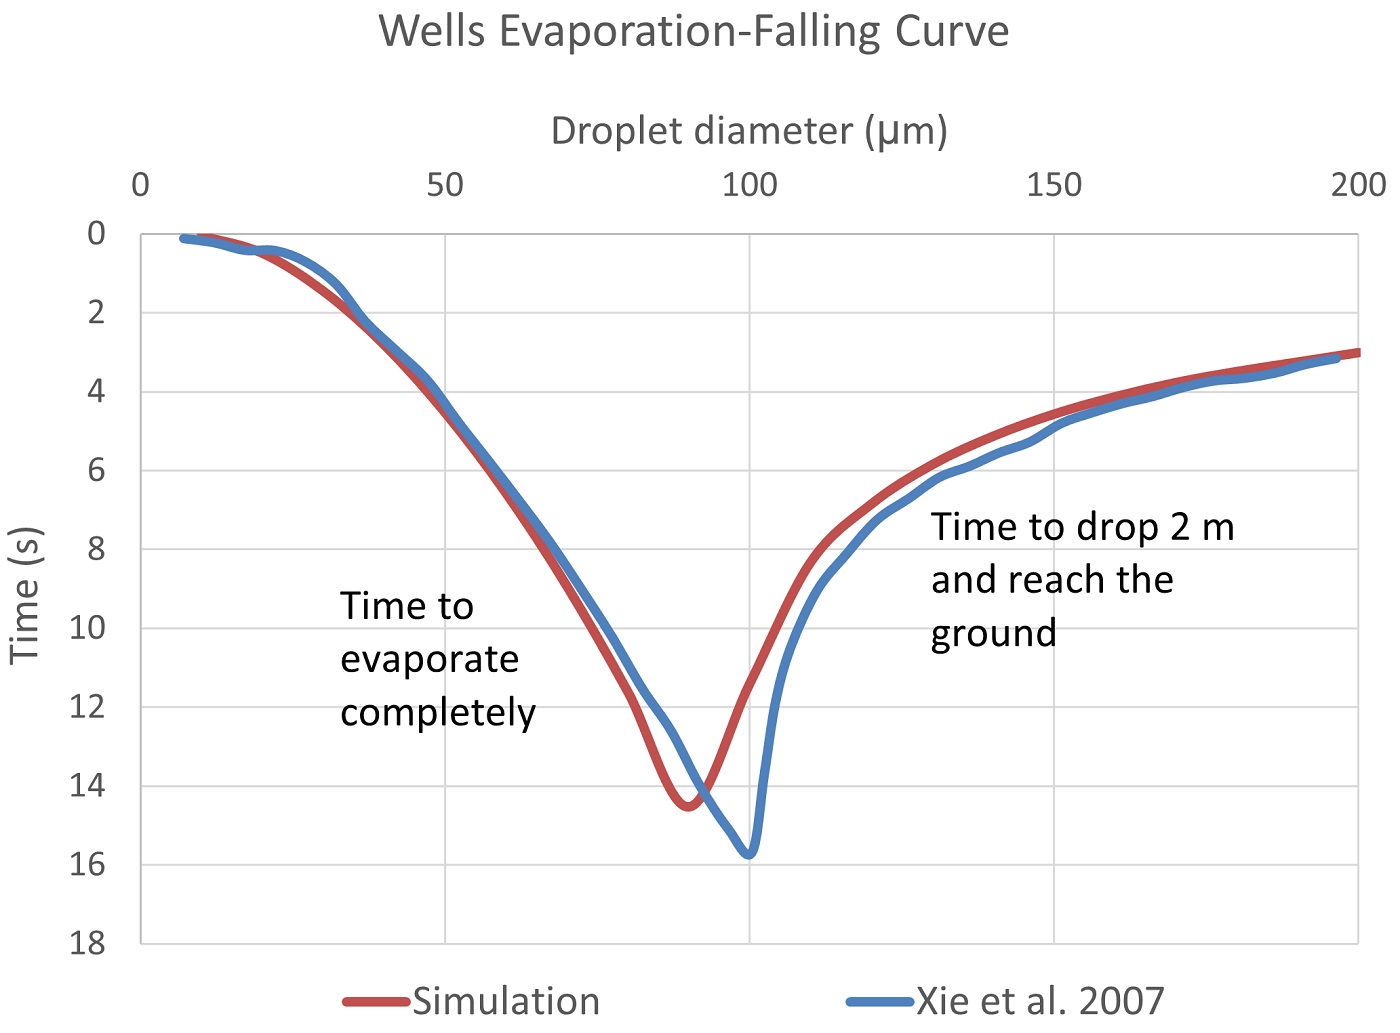 Comparison of evaporation and falling time between simulation and literature